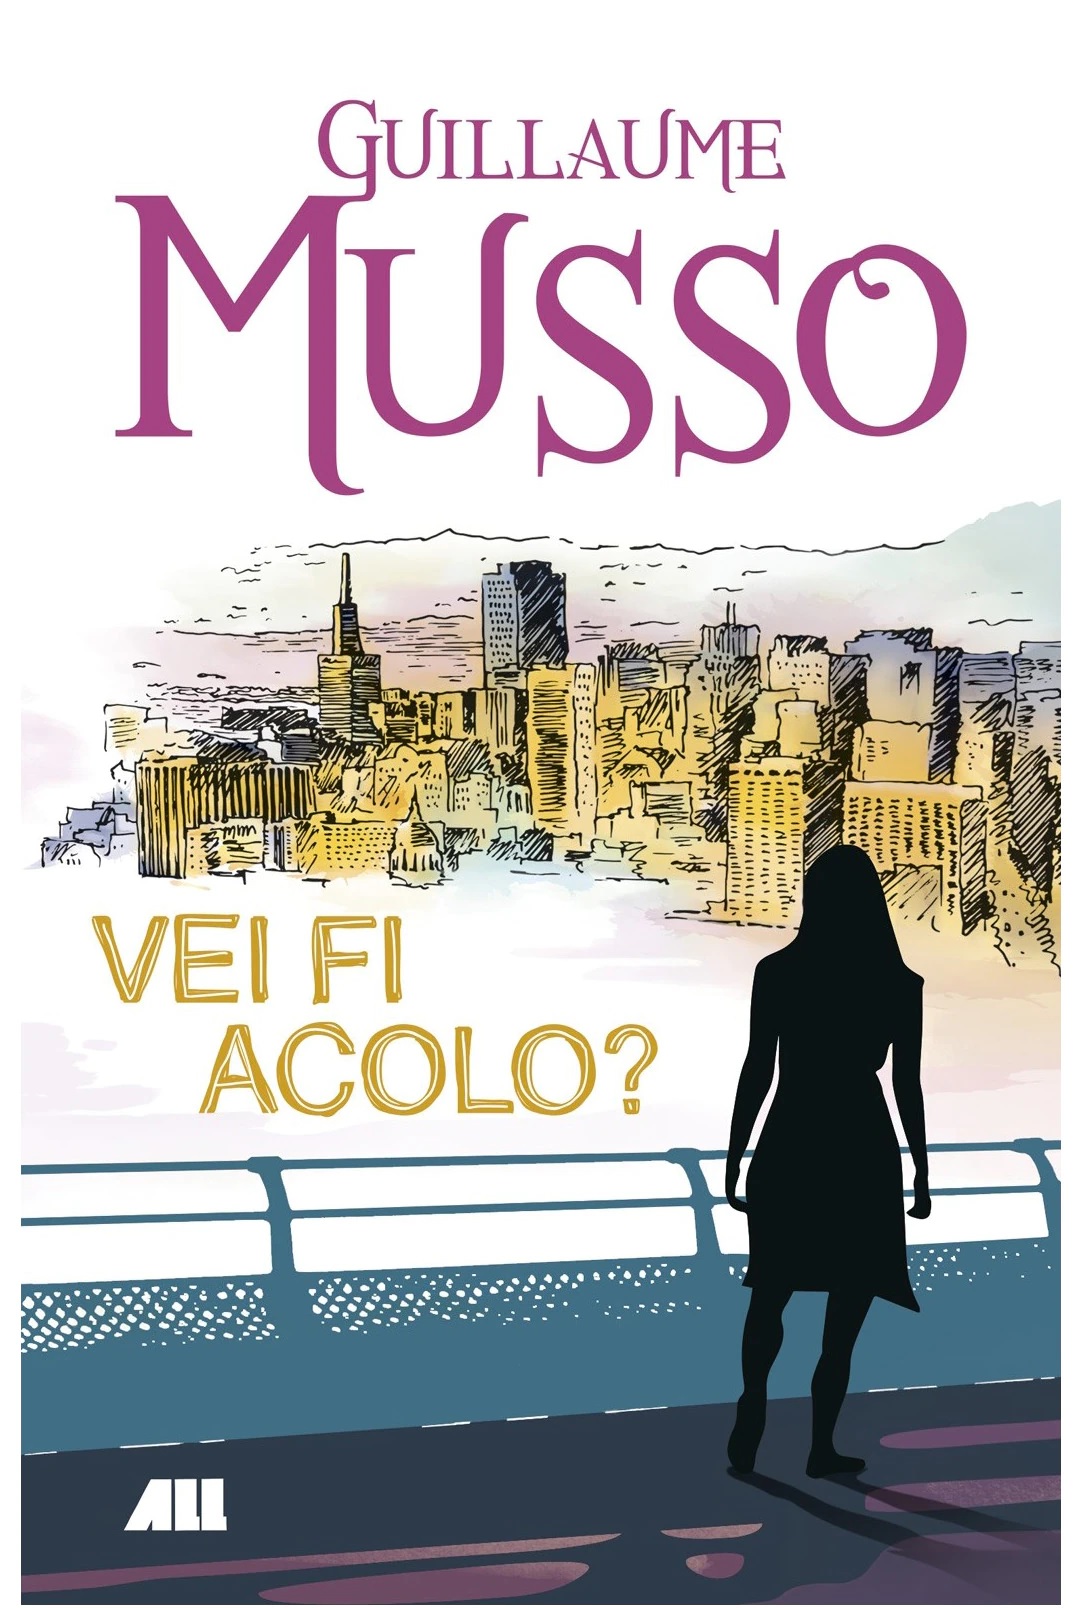 Vei fi acolo? | Guillaume Musso ALL poza bestsellers.ro